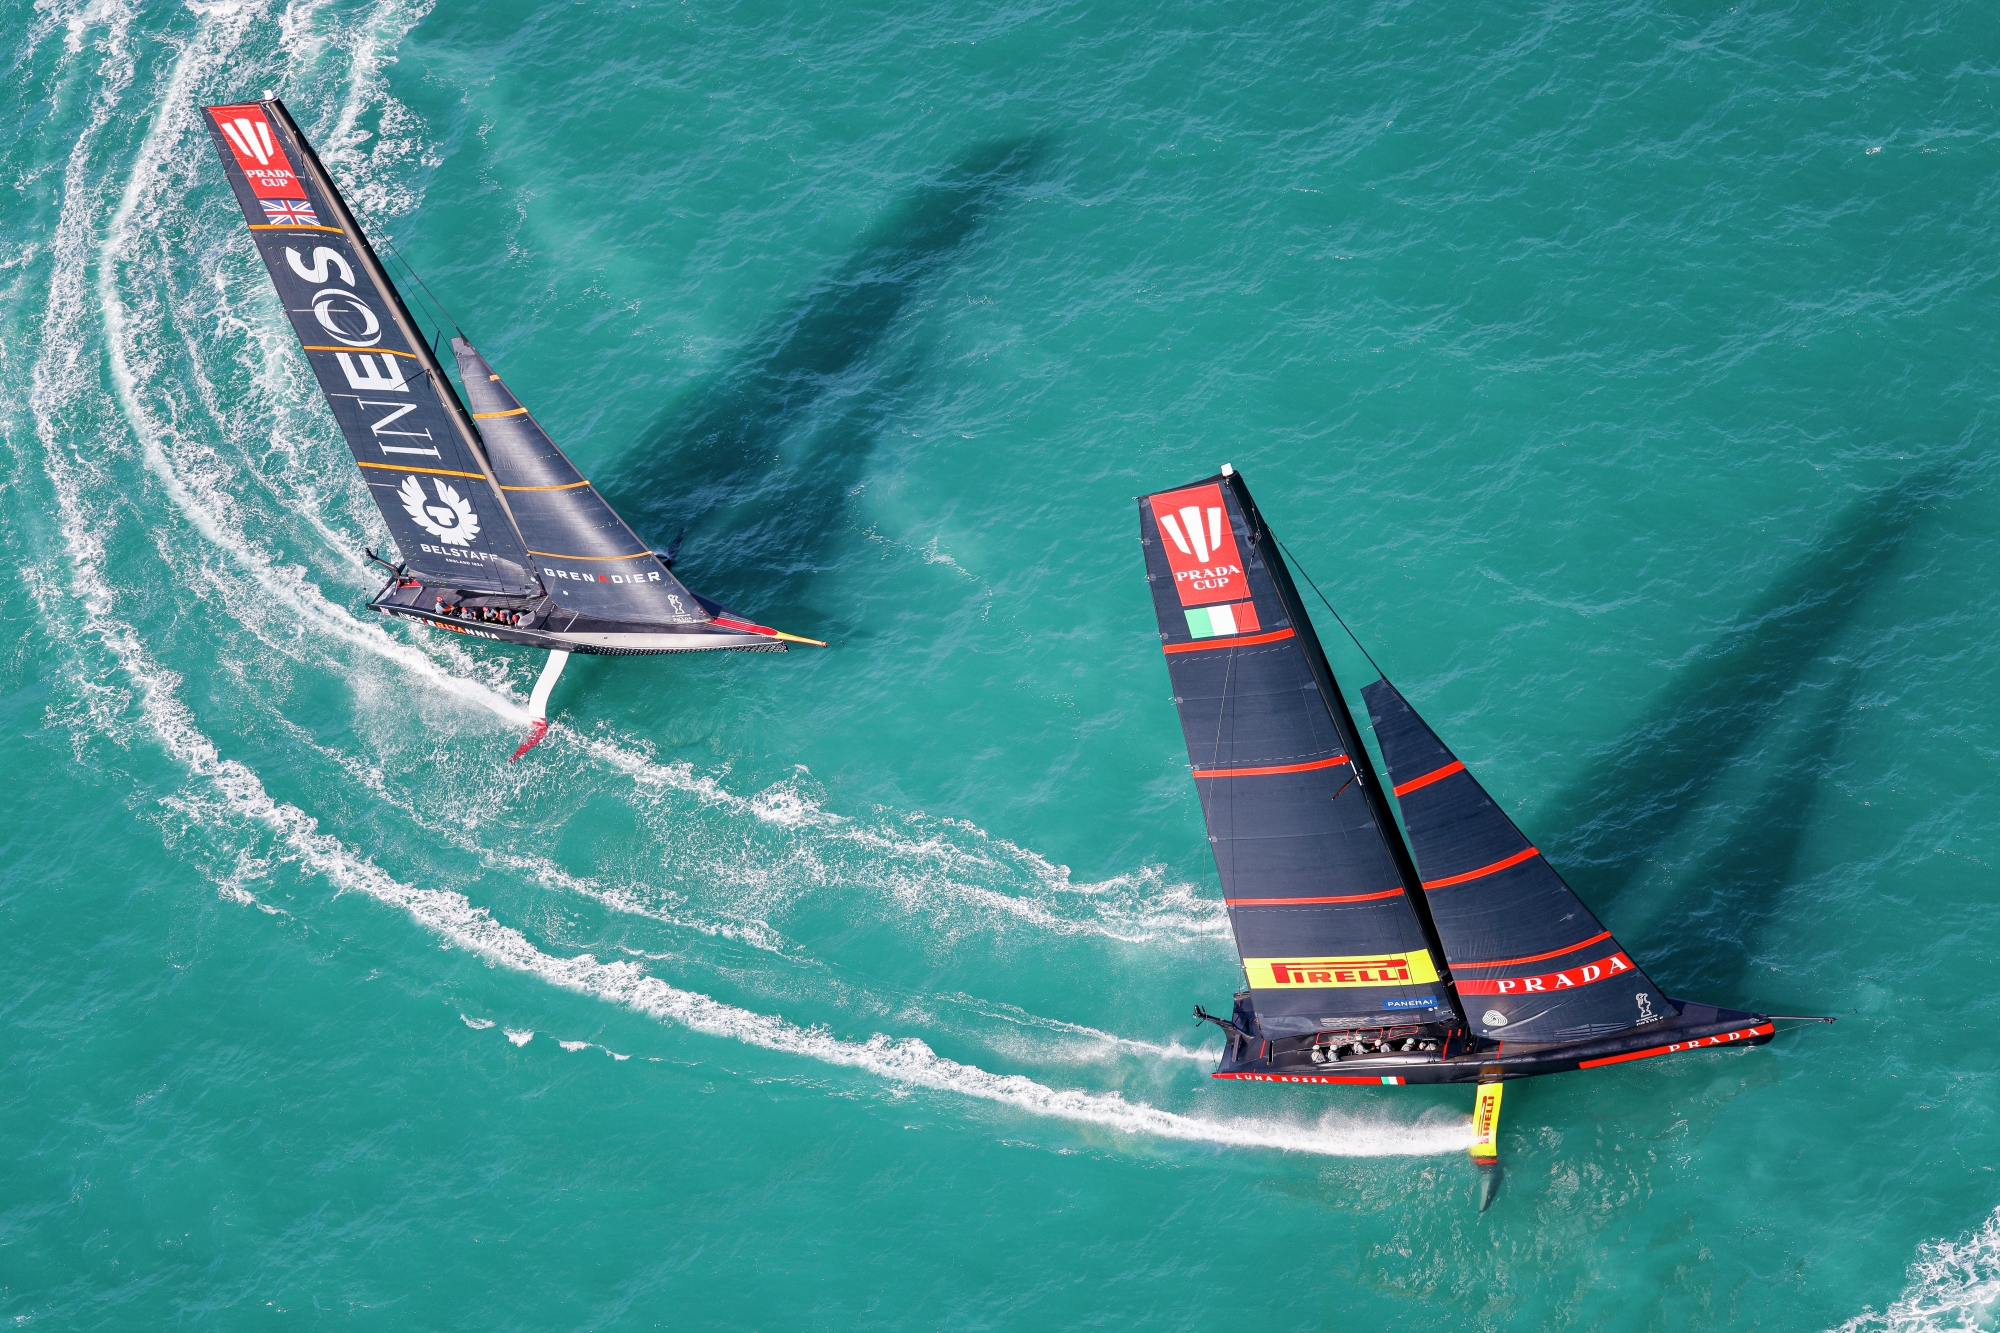 www.americascup.com